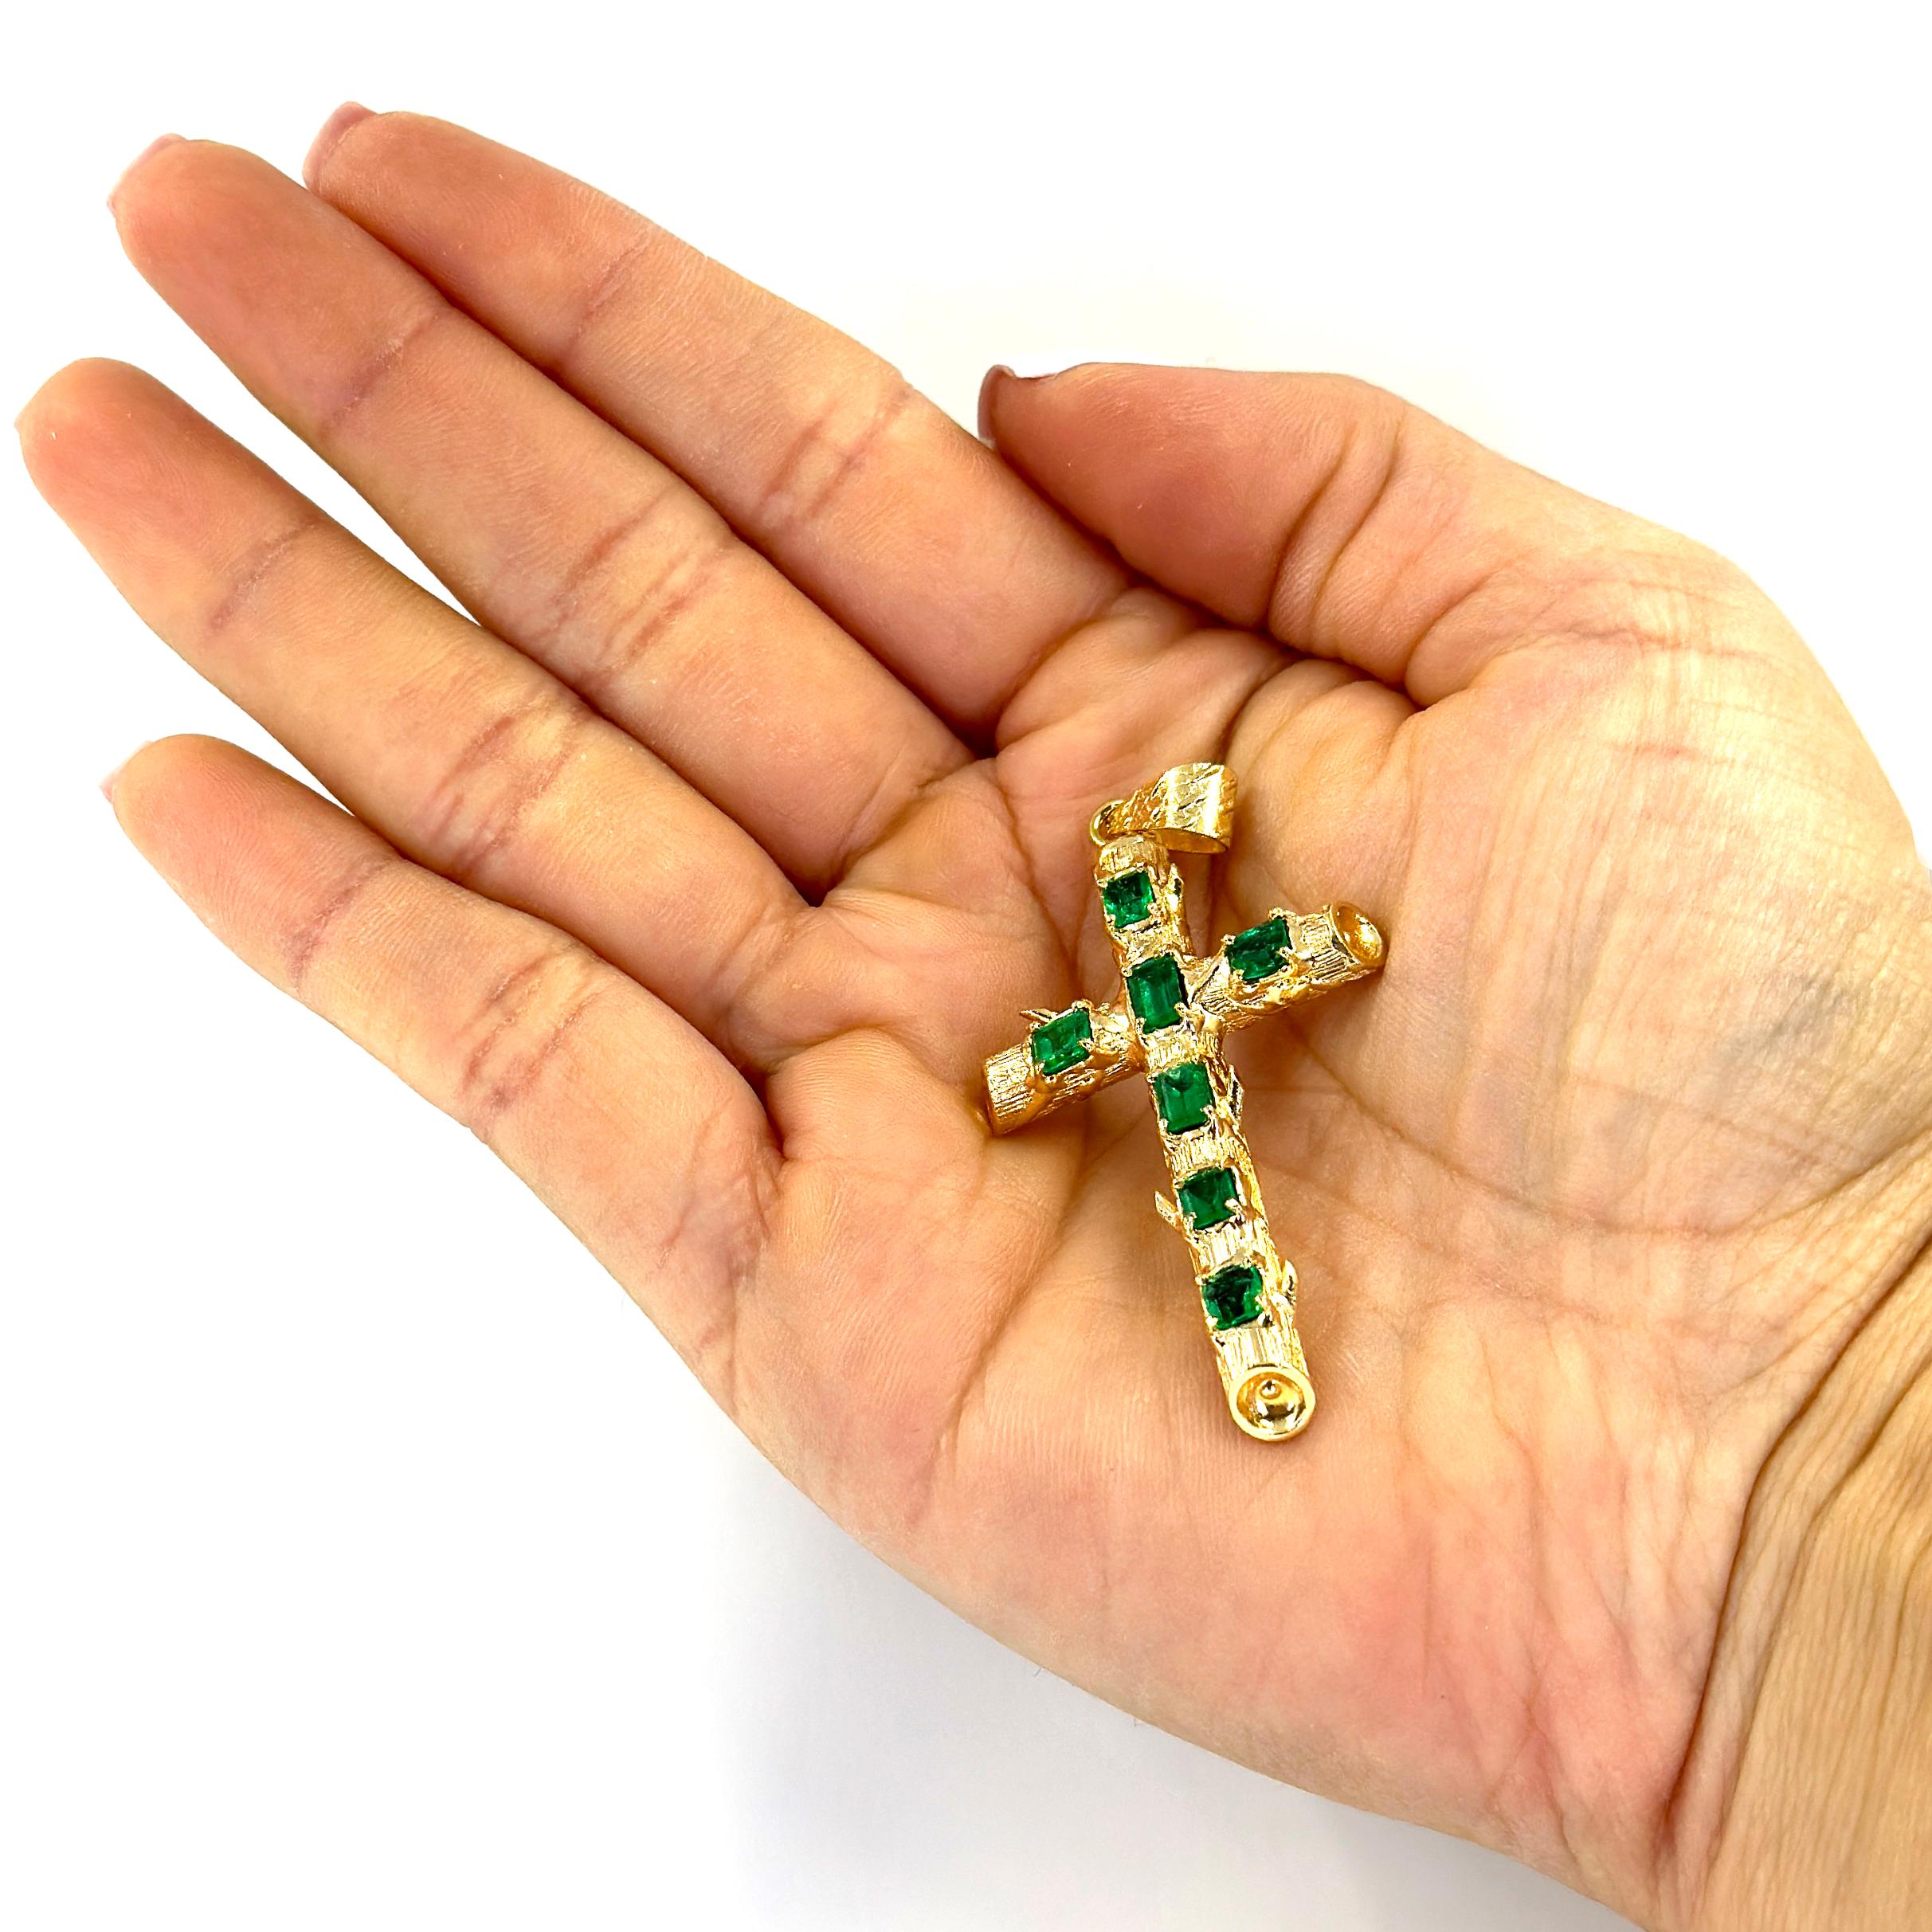 18 Karat Yellow Gold Cross with Branch Design Featuring 7 Emeralds Totaling Approximately 2.50 Carats. 2.25 Inches Long. Finished Weight is 7.5 Grams.